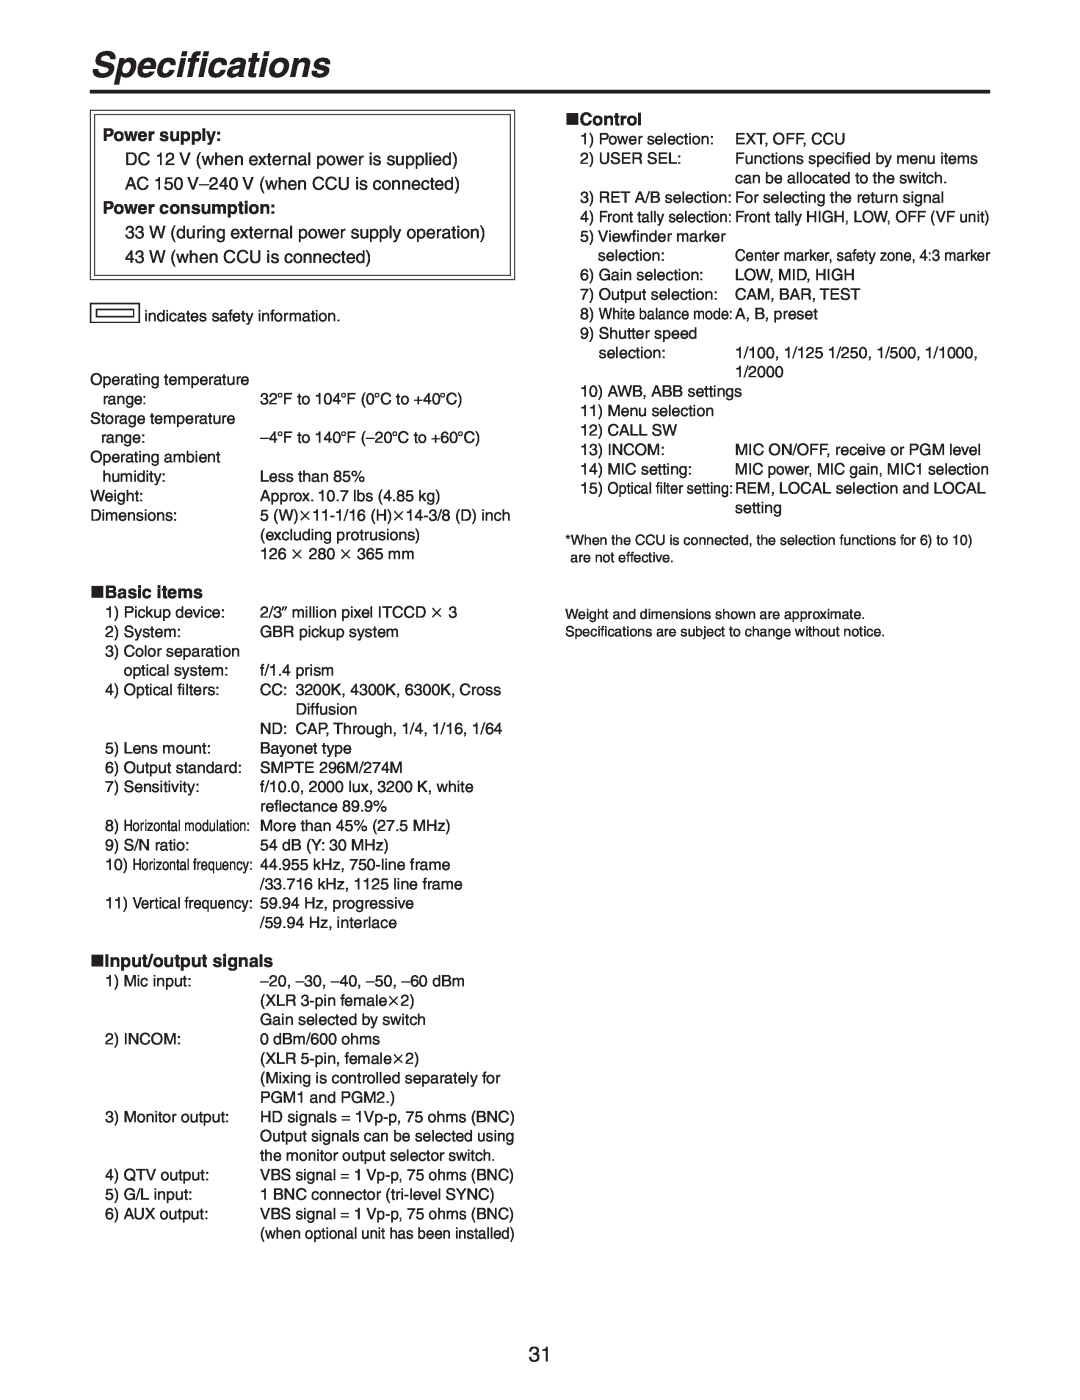 Panasonic AK-HC931BP manual Specifications, W during external power supply operation, W when CCU is connected, Power supply 